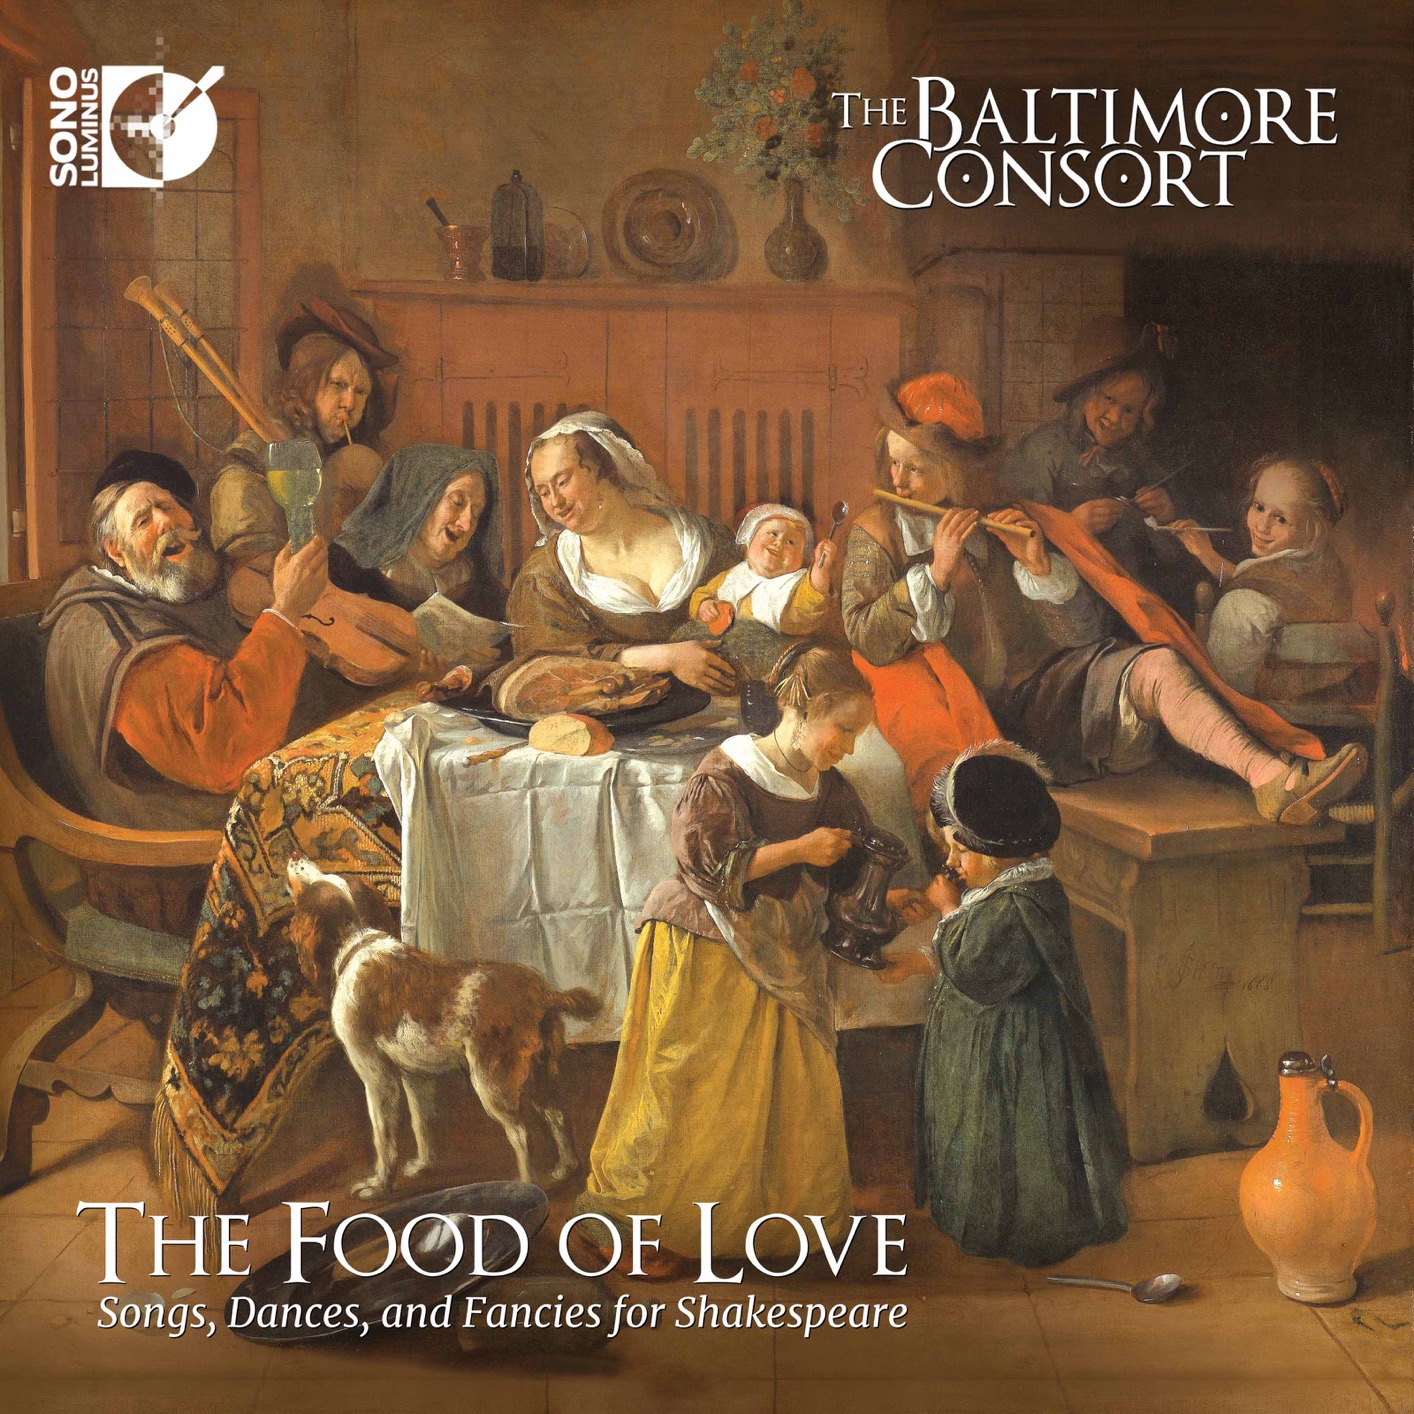 The Baltimore Consort – The Food of Love: Songs, Dances, and Fancies for Shakespeare (2019) [FLAC 24bit/192kHz]